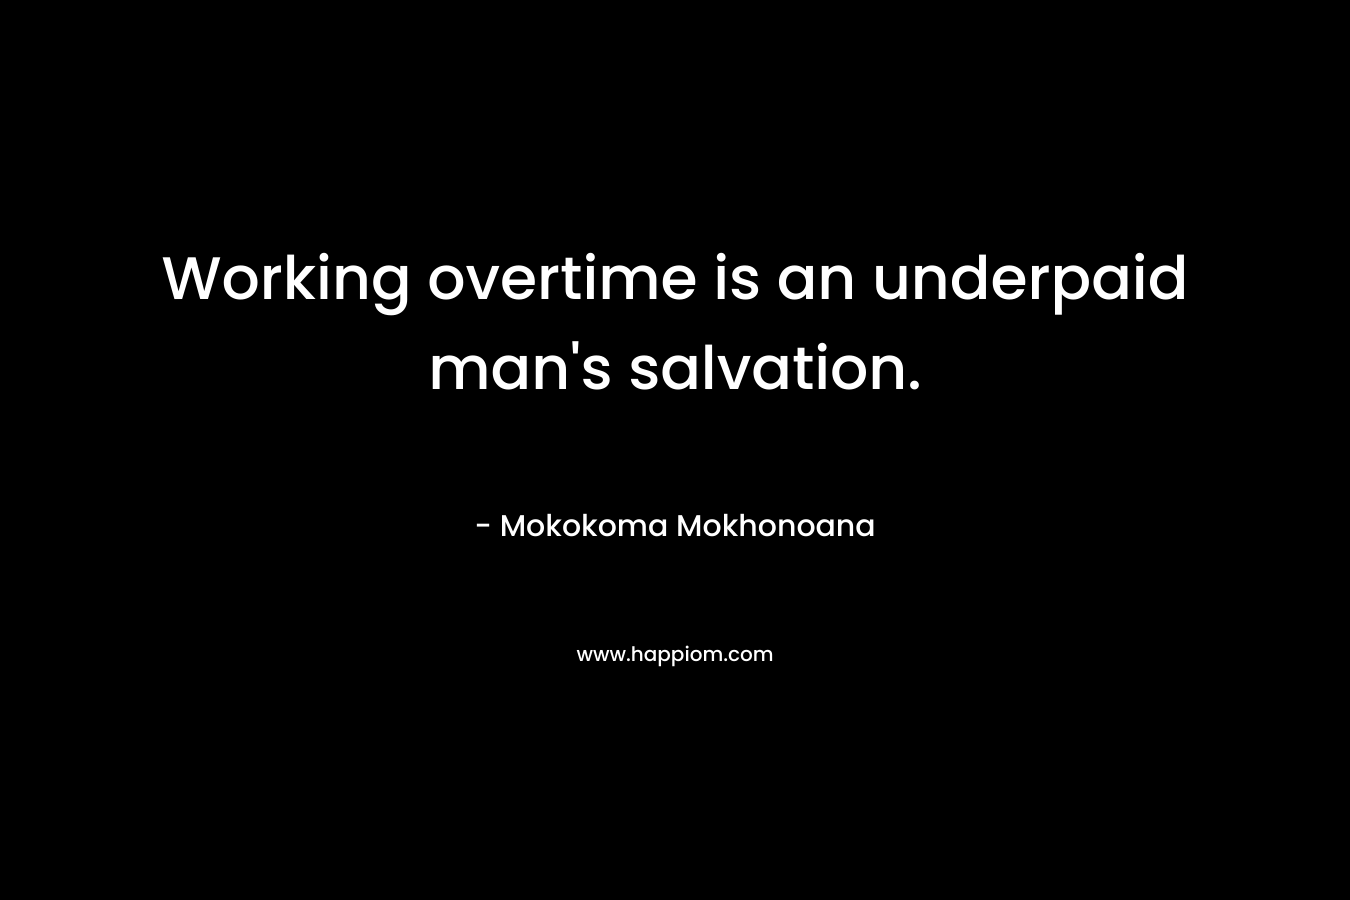 Working overtime is an underpaid man's salvation.